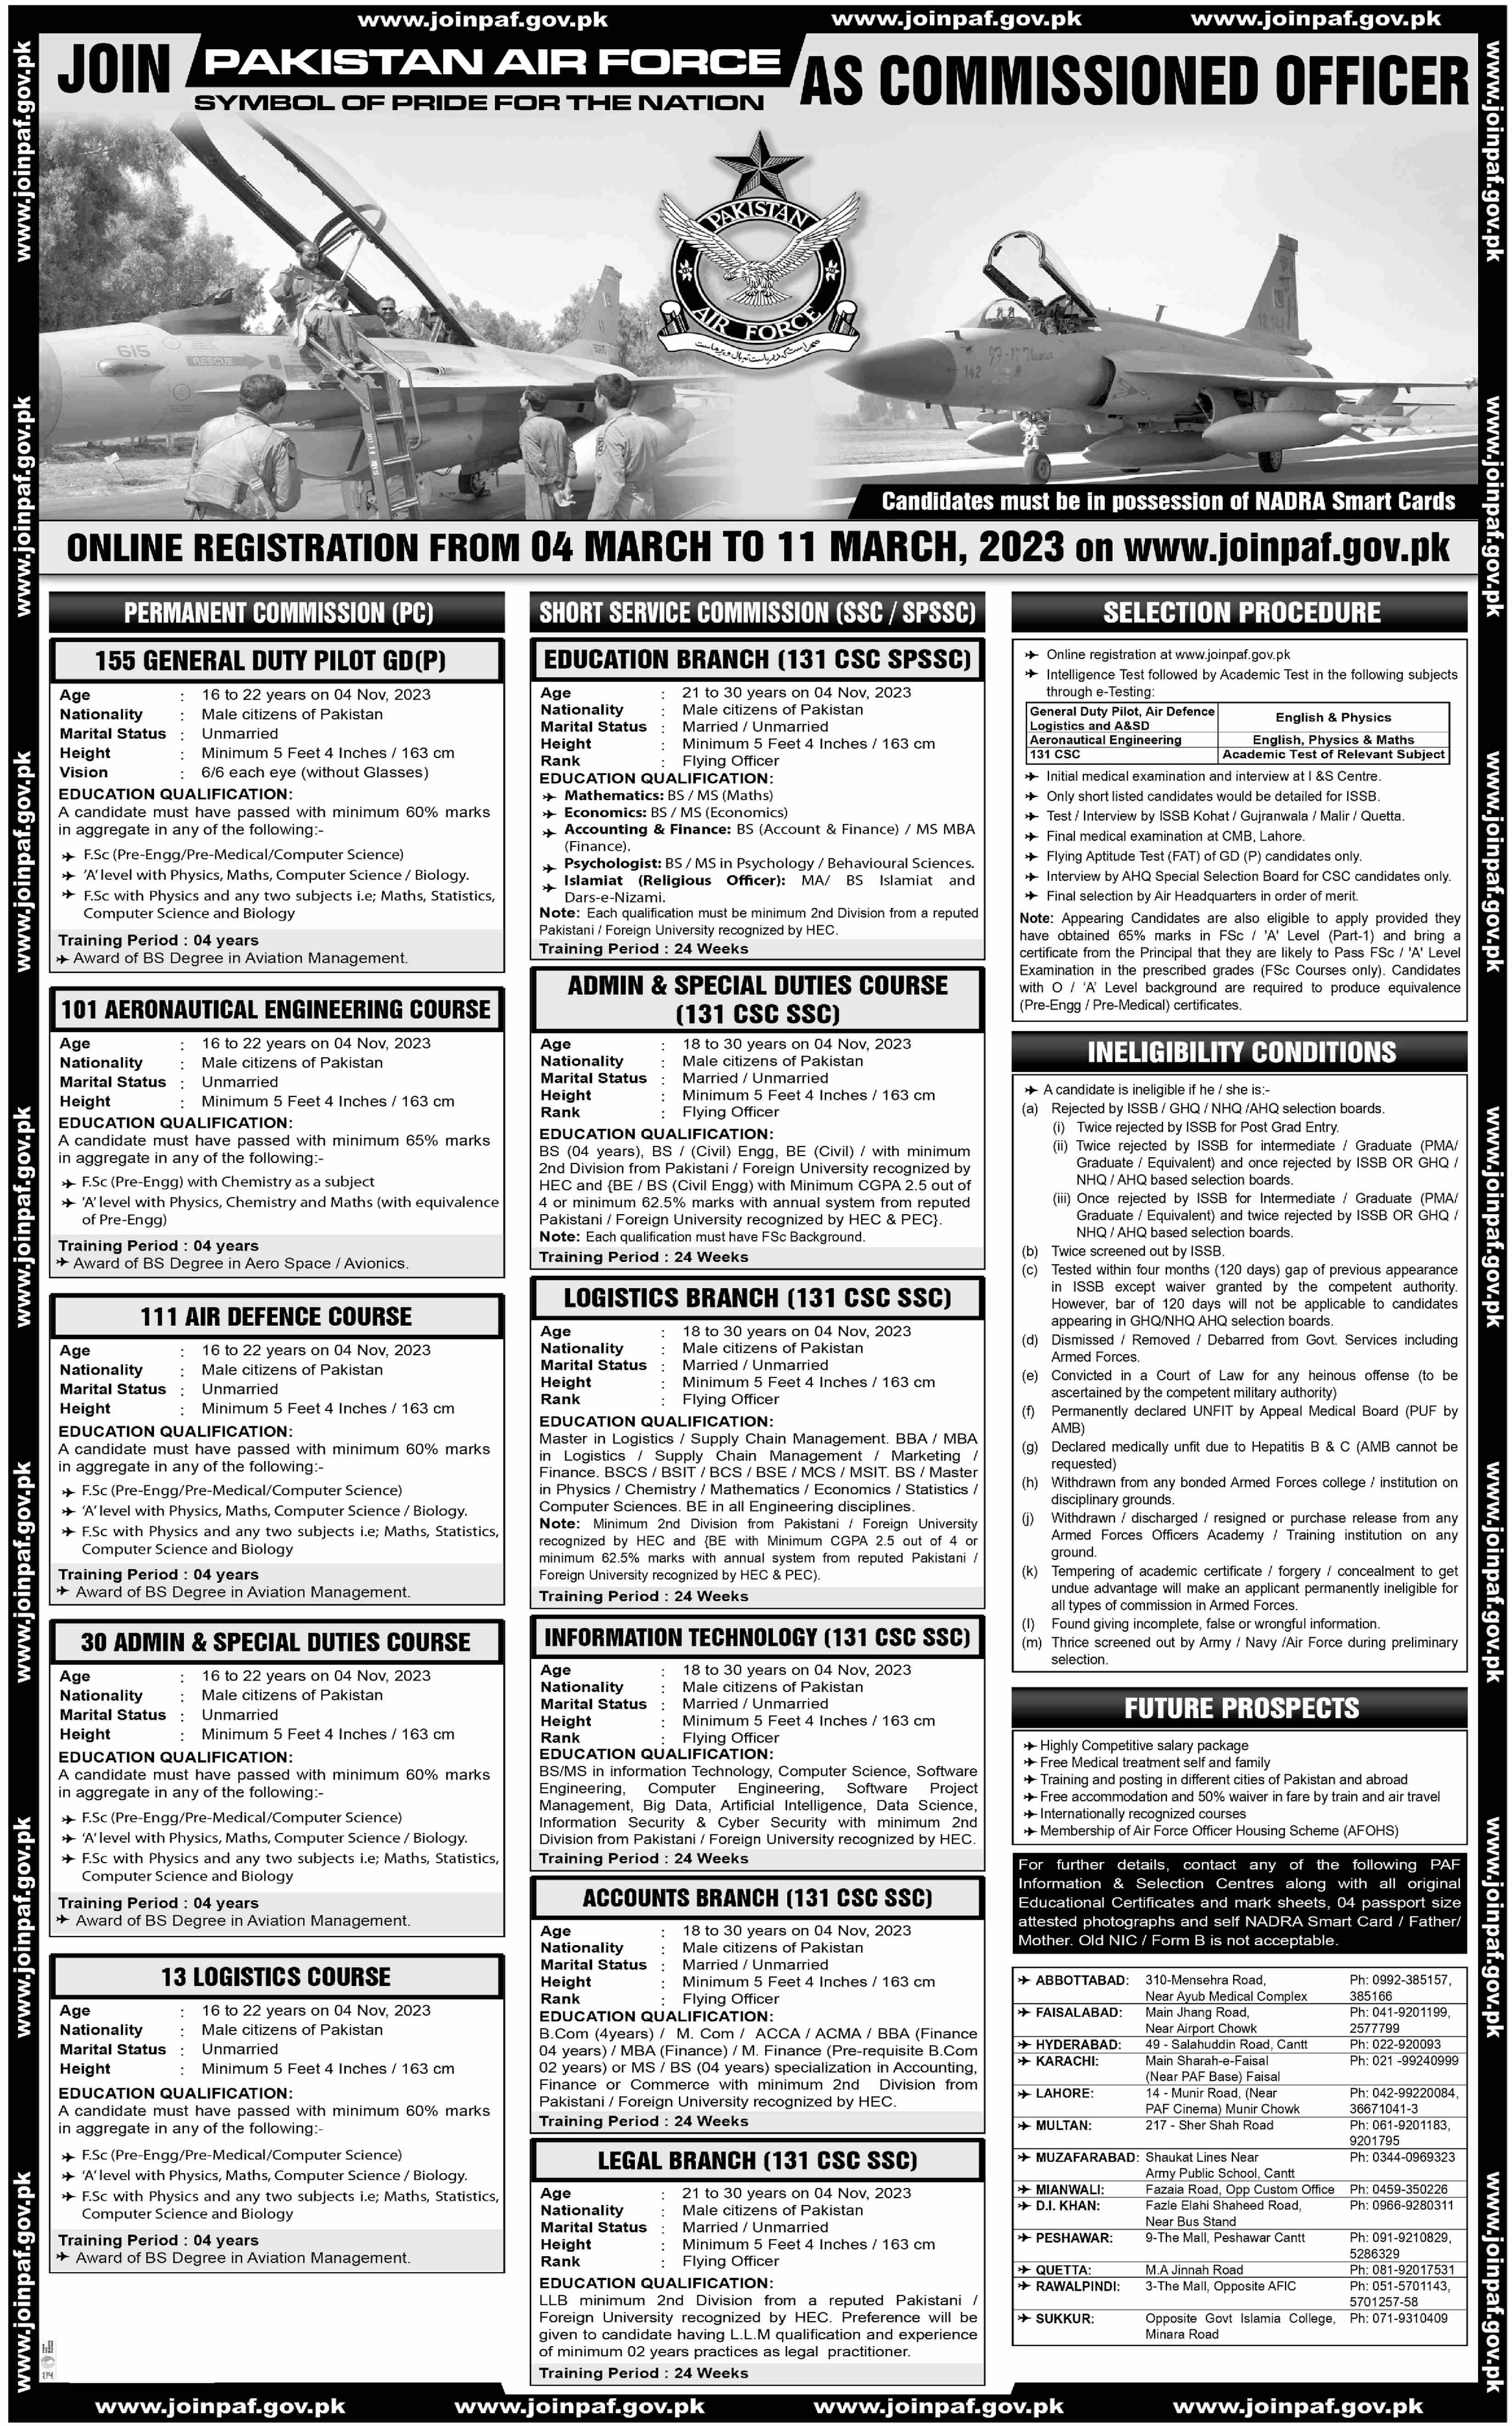 Career Opportunities in Pakistan Air Force